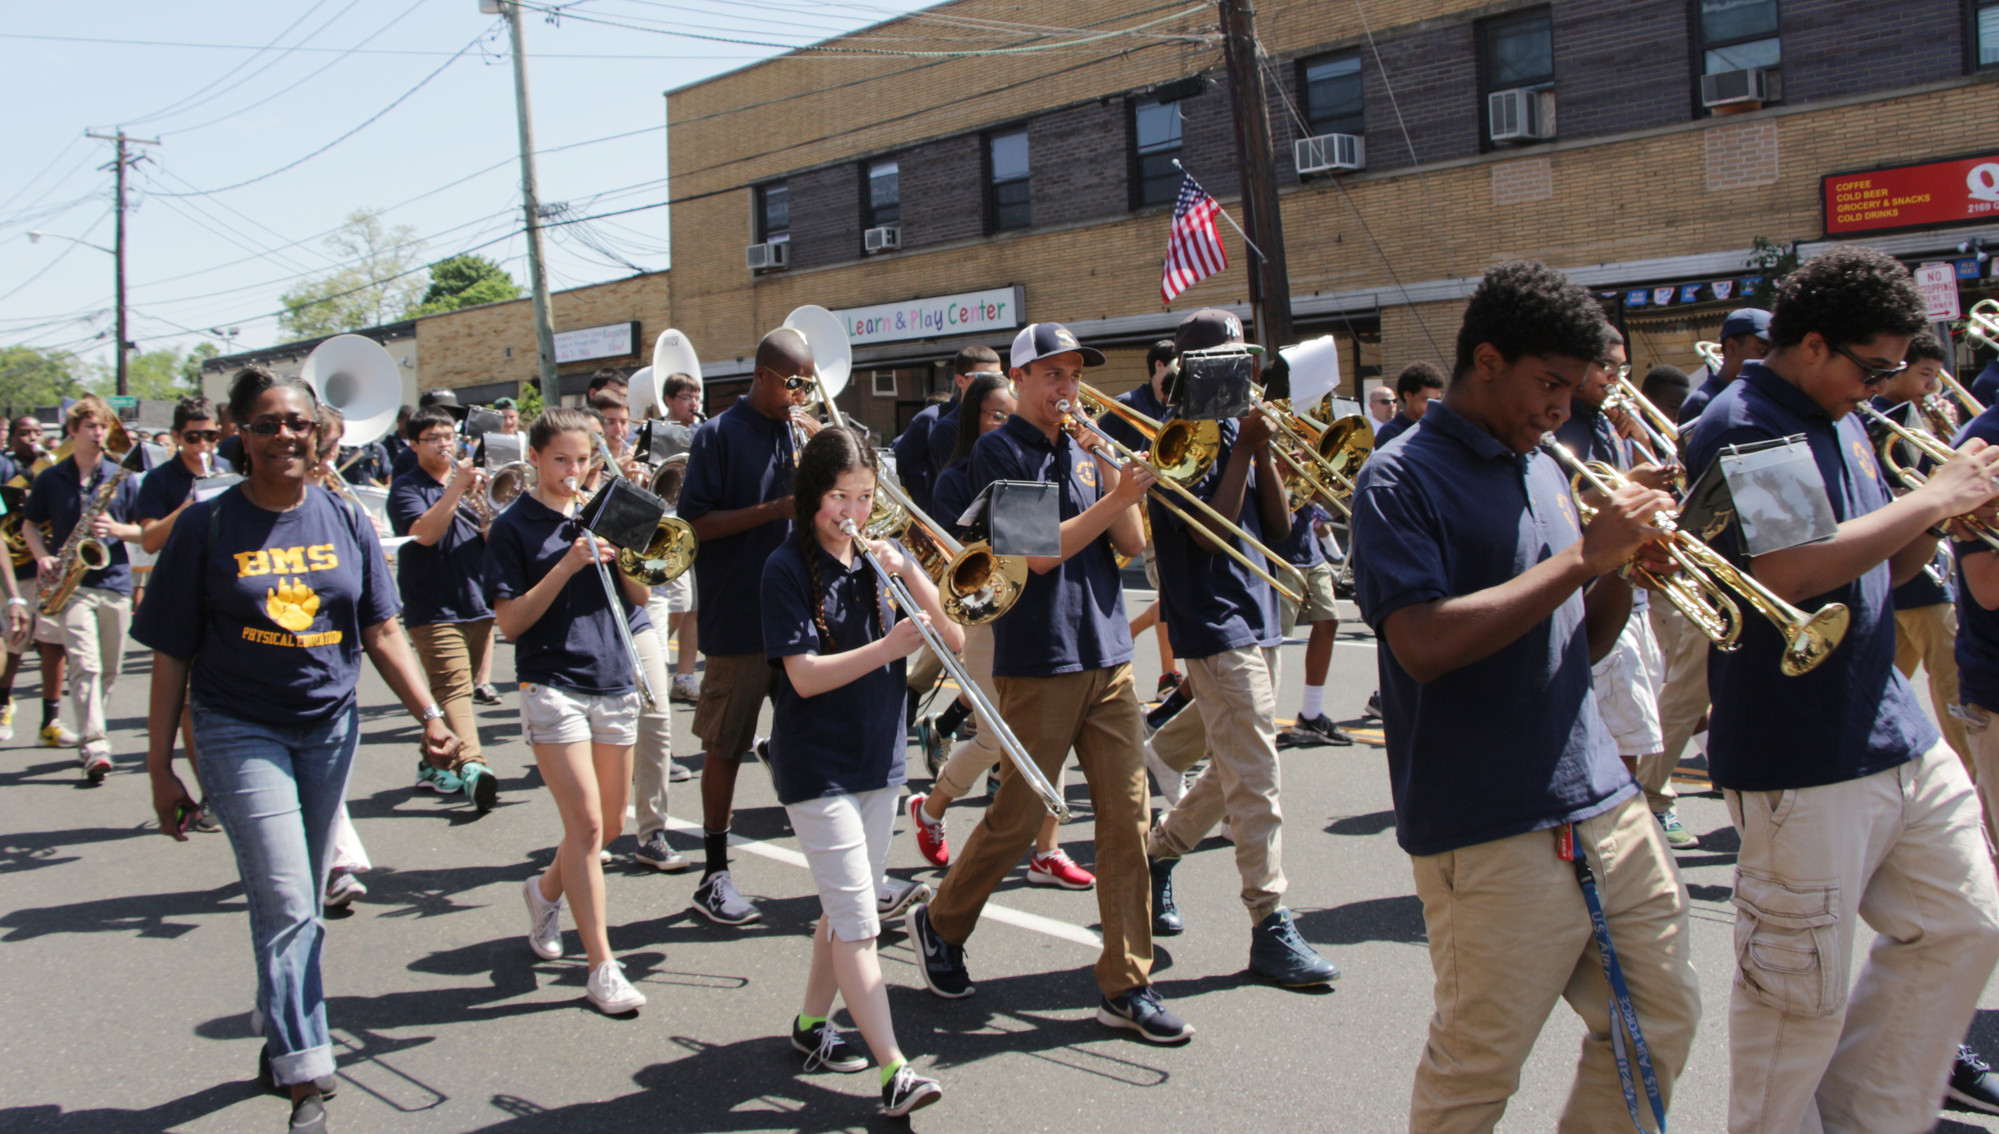 The Baldwin High School marching band played patriotic songs for onlookers to enjoy.